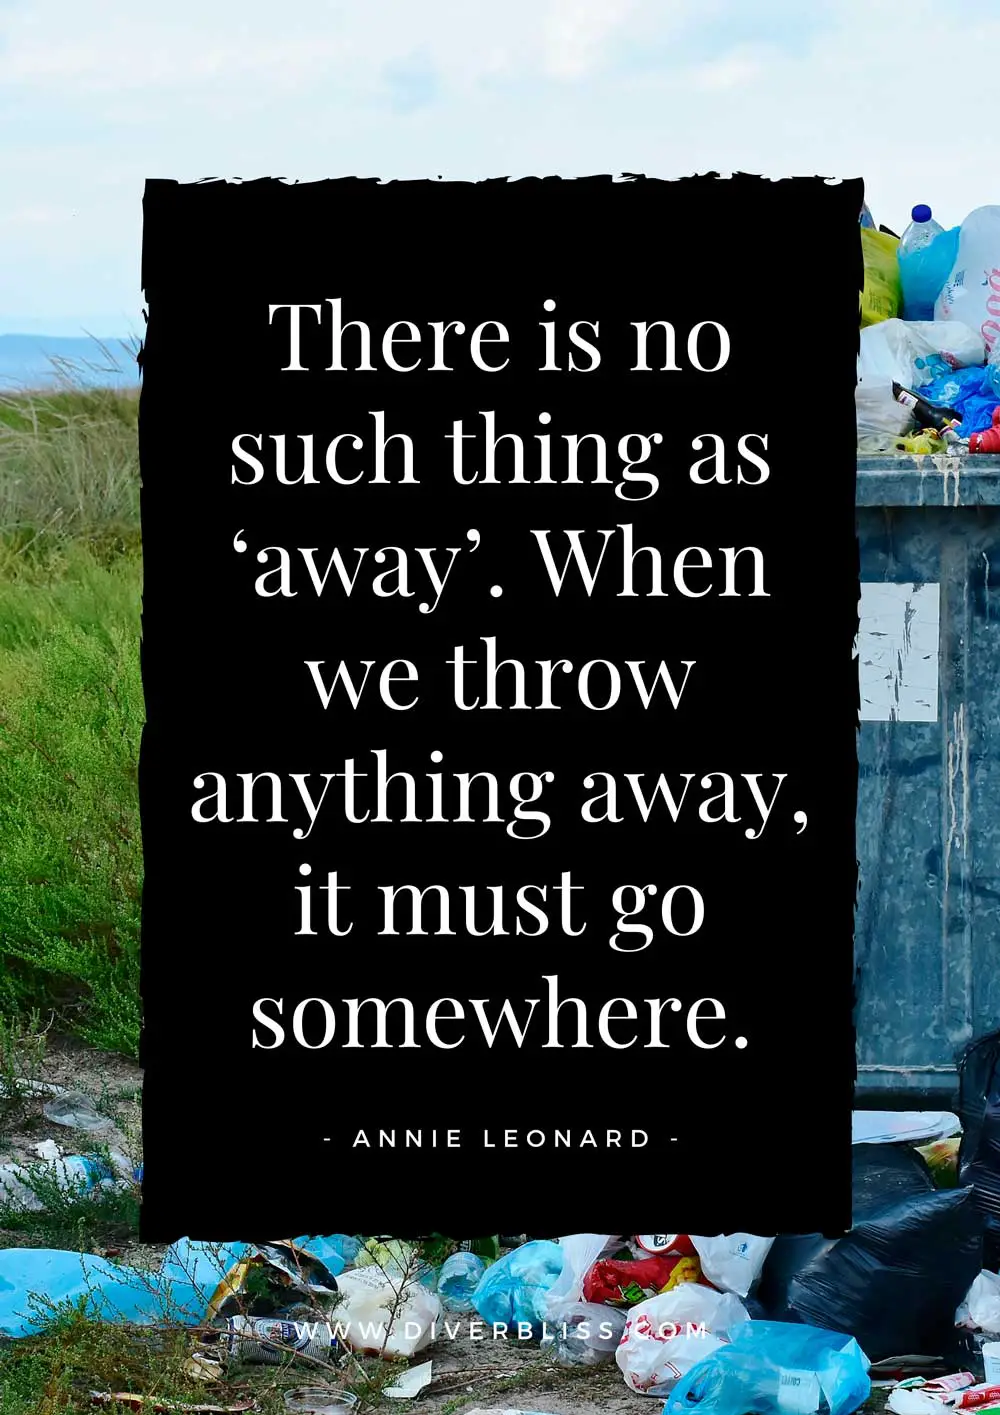 Plastic Pollution Quotes Poster: "There is no such thing as ‘away’. When we throw anything away, it must go somewhere." – Annie Leonard